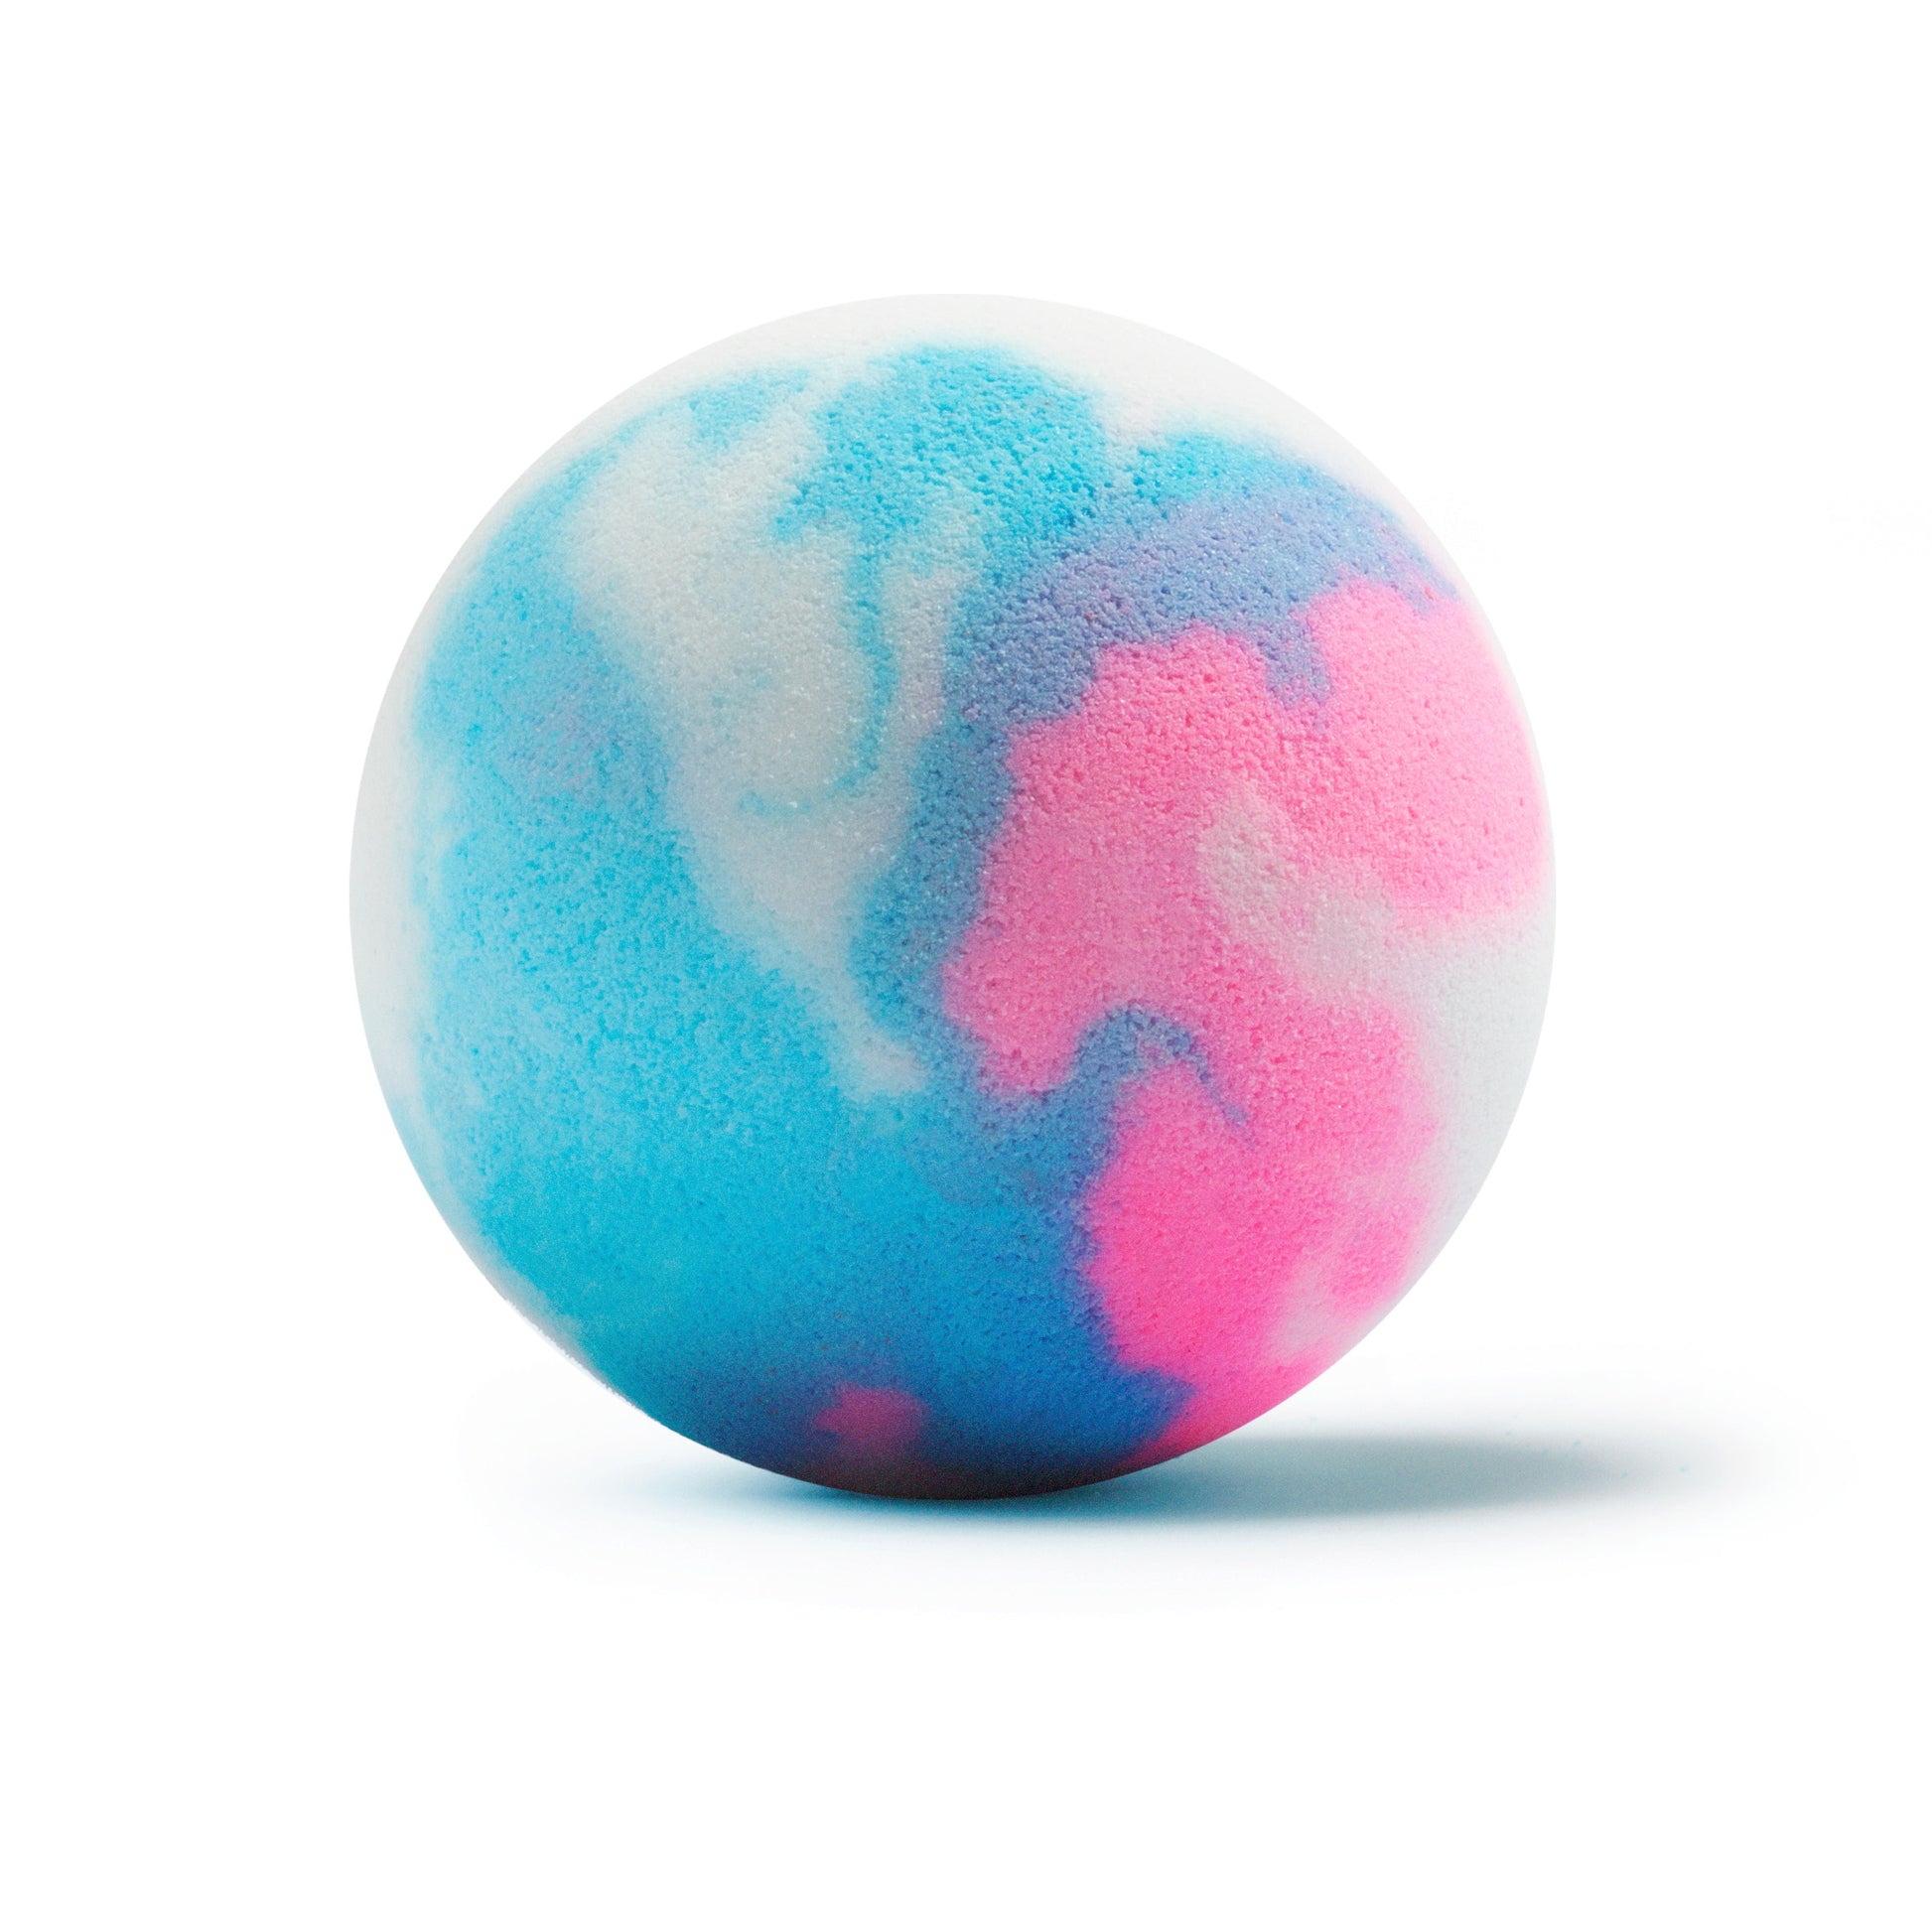 a blue, pink and white bath bomb 